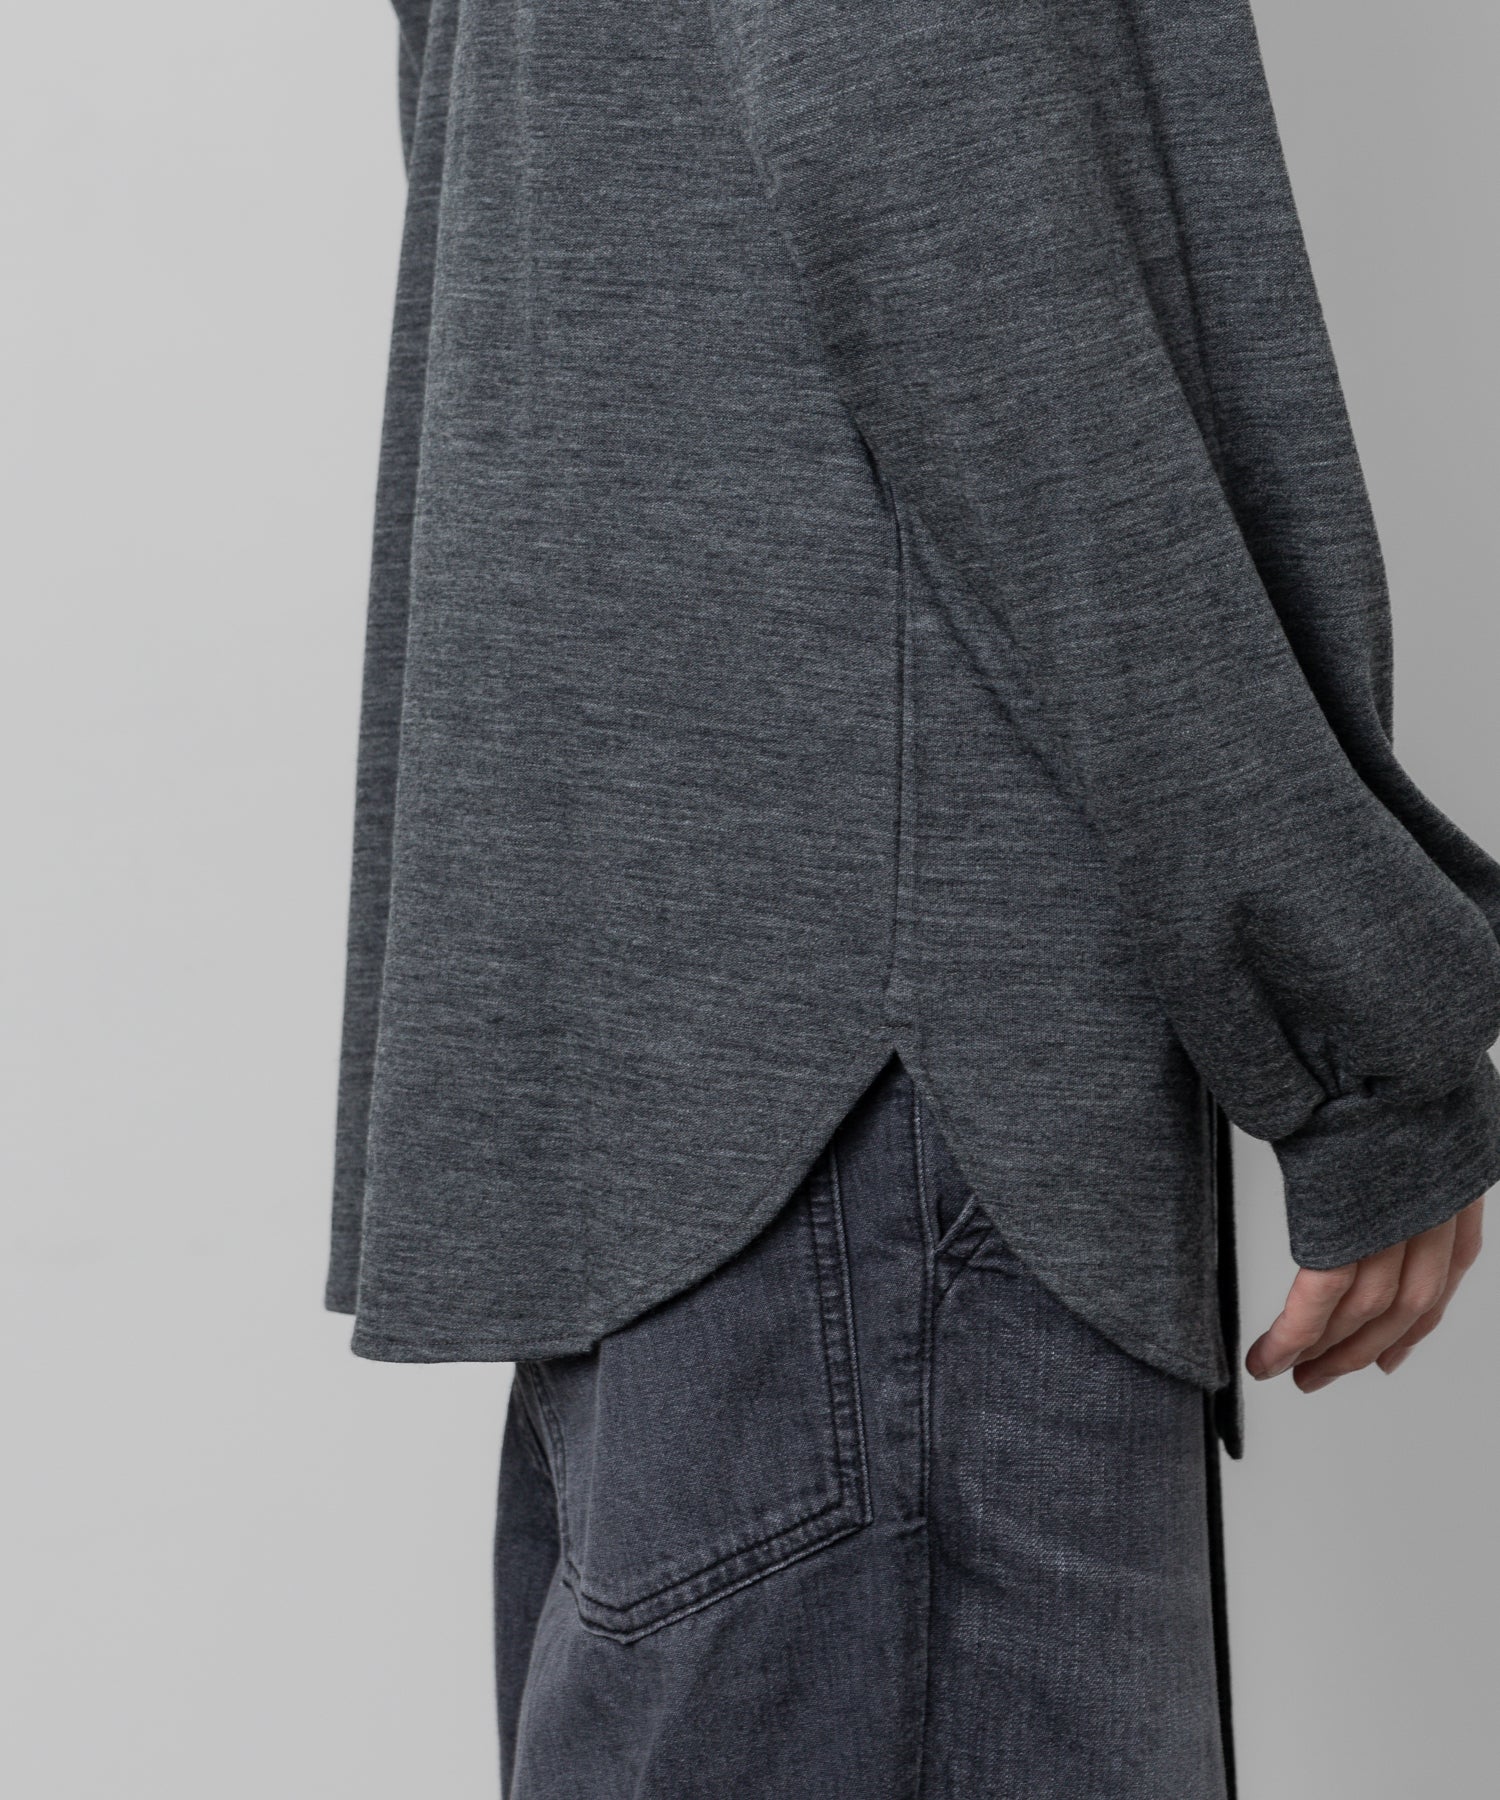 ato(アトウ)のSTAND COLLAR JERSEY WITH STALLのCHARCOAL